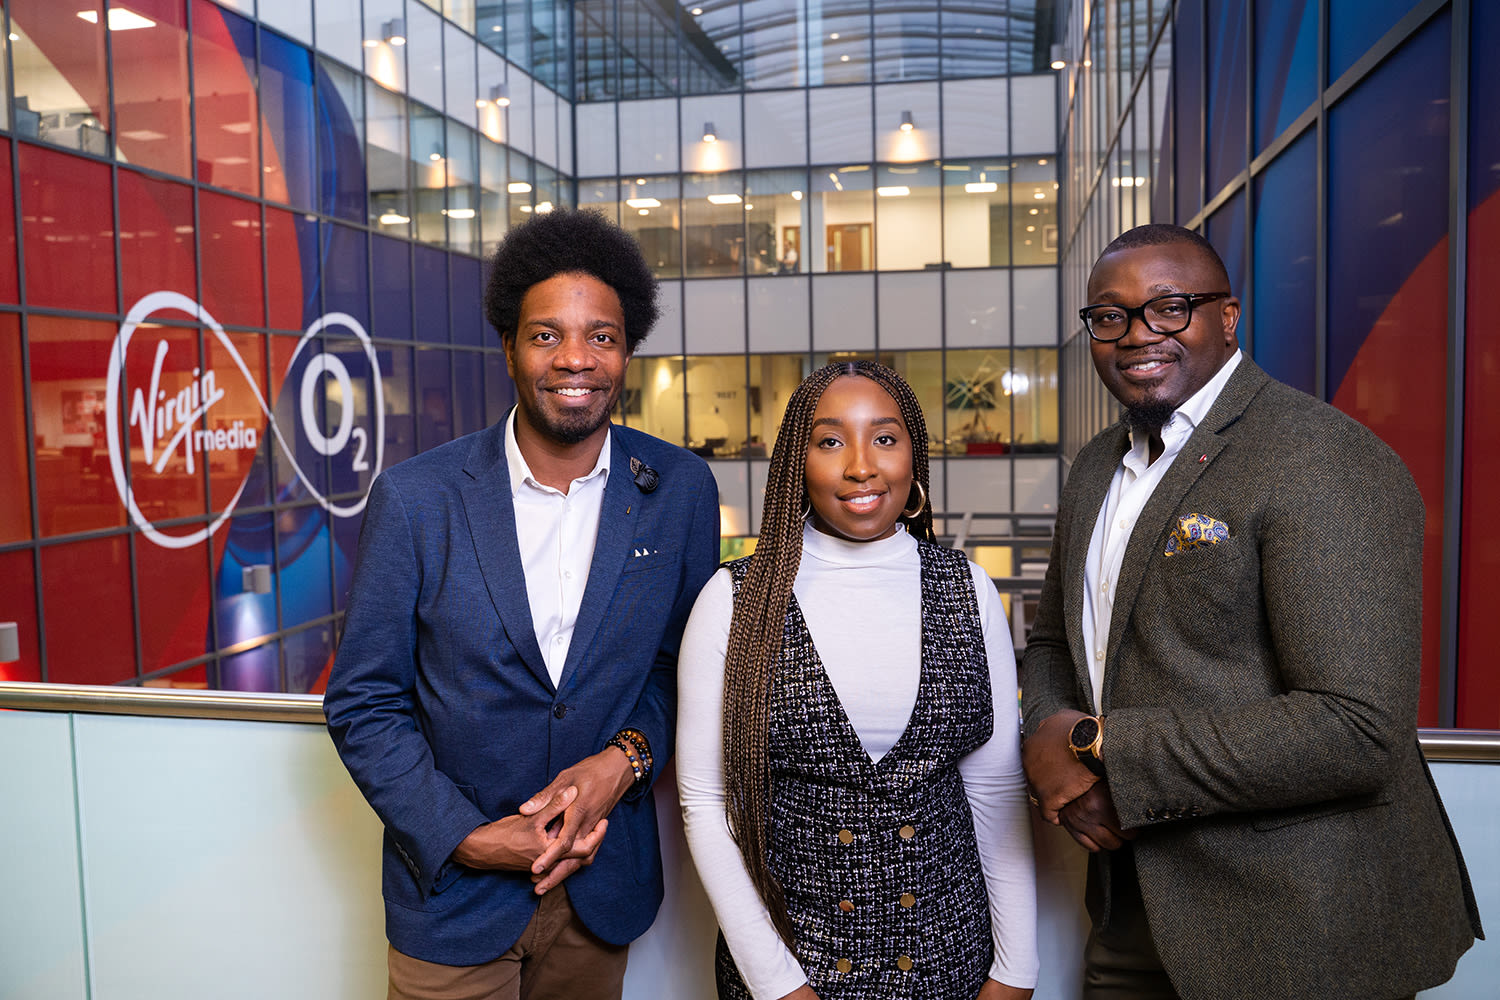 (L-R) Marc Nicoue and Leanna Edwards - co-chairs of Virgin Media O2’s Enrich employee network, and Duro Oye, Founder and Chief Executive Officer at 20/20 Change